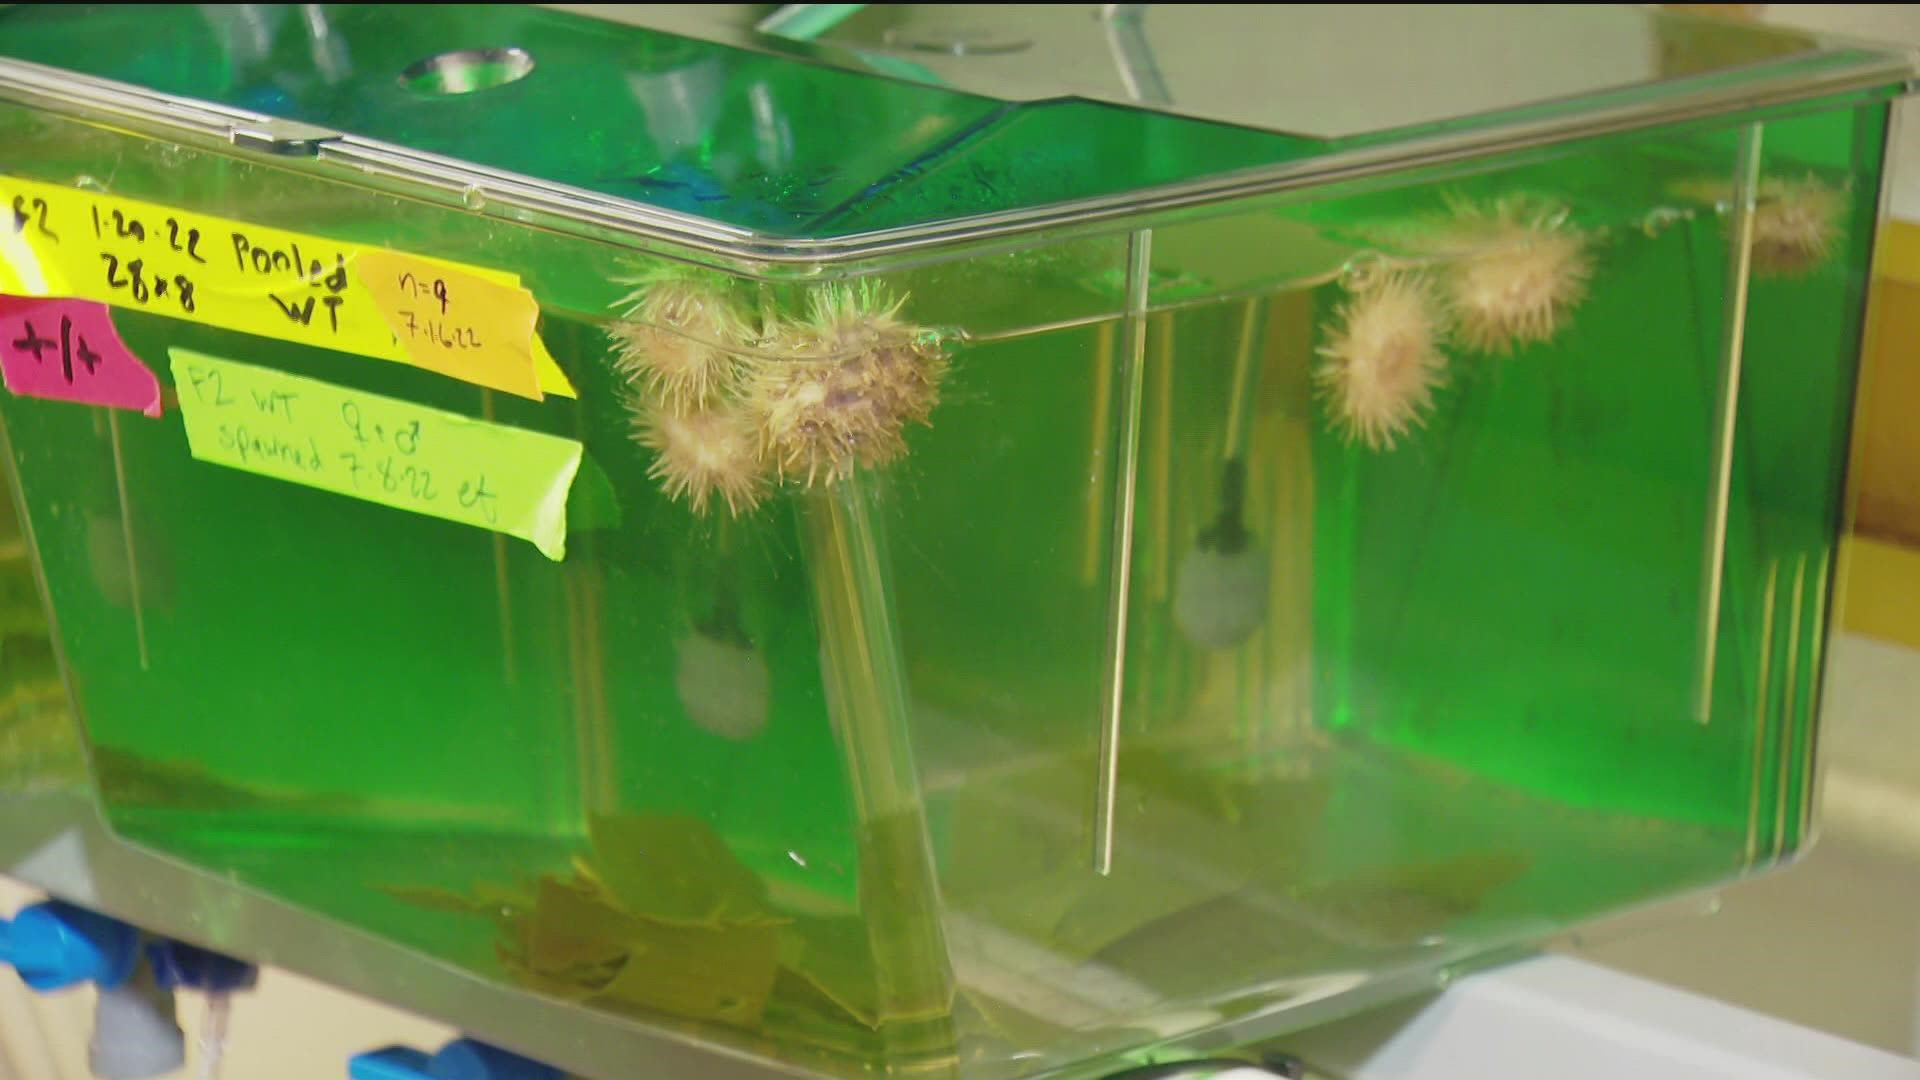 In this Earth 8 report, Neda Iranpour shows us how sea urchins are helping provide answers out of a lab in La Jolla.